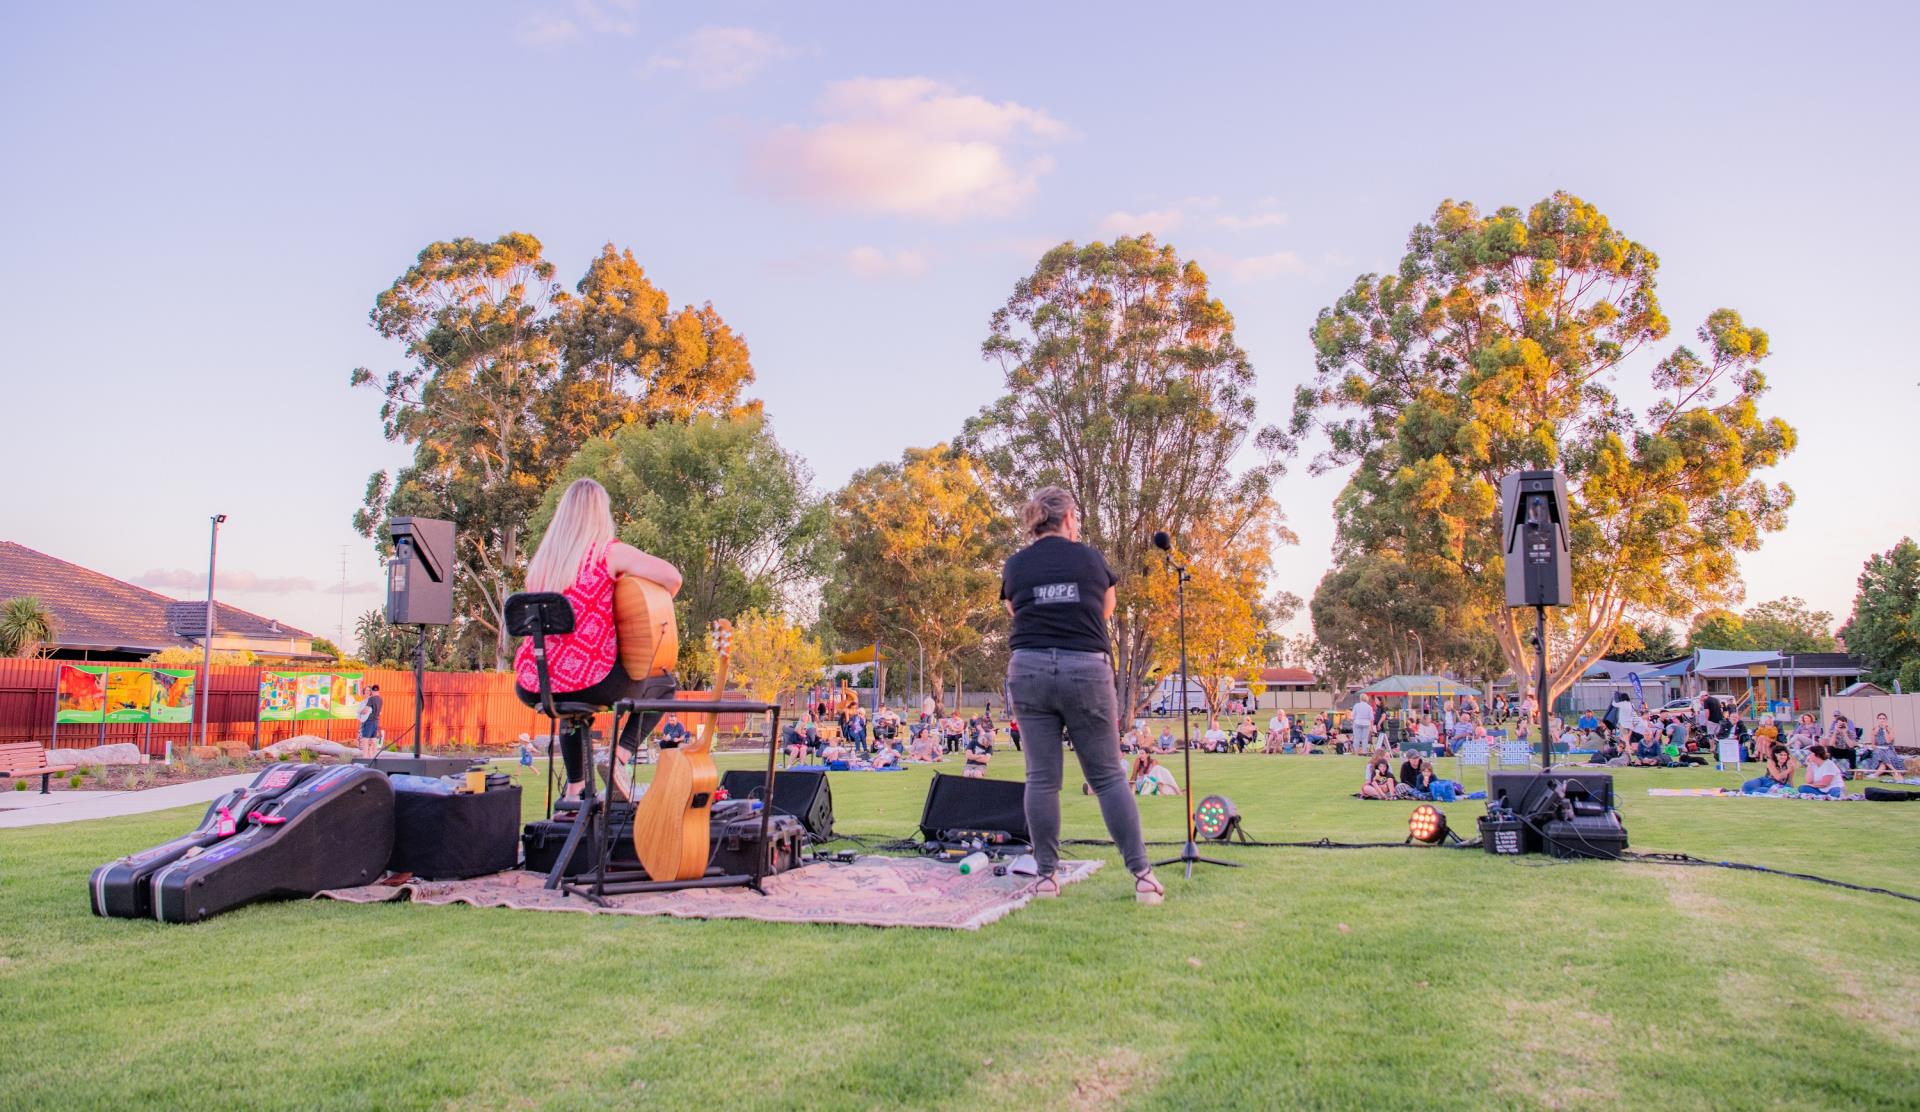 Tracey Barnett and Kelly Hope from Hope CODA (Children of Deaf Adults) Service performing at last year’s Summer Sounds Carramar Park, Dardanup. 